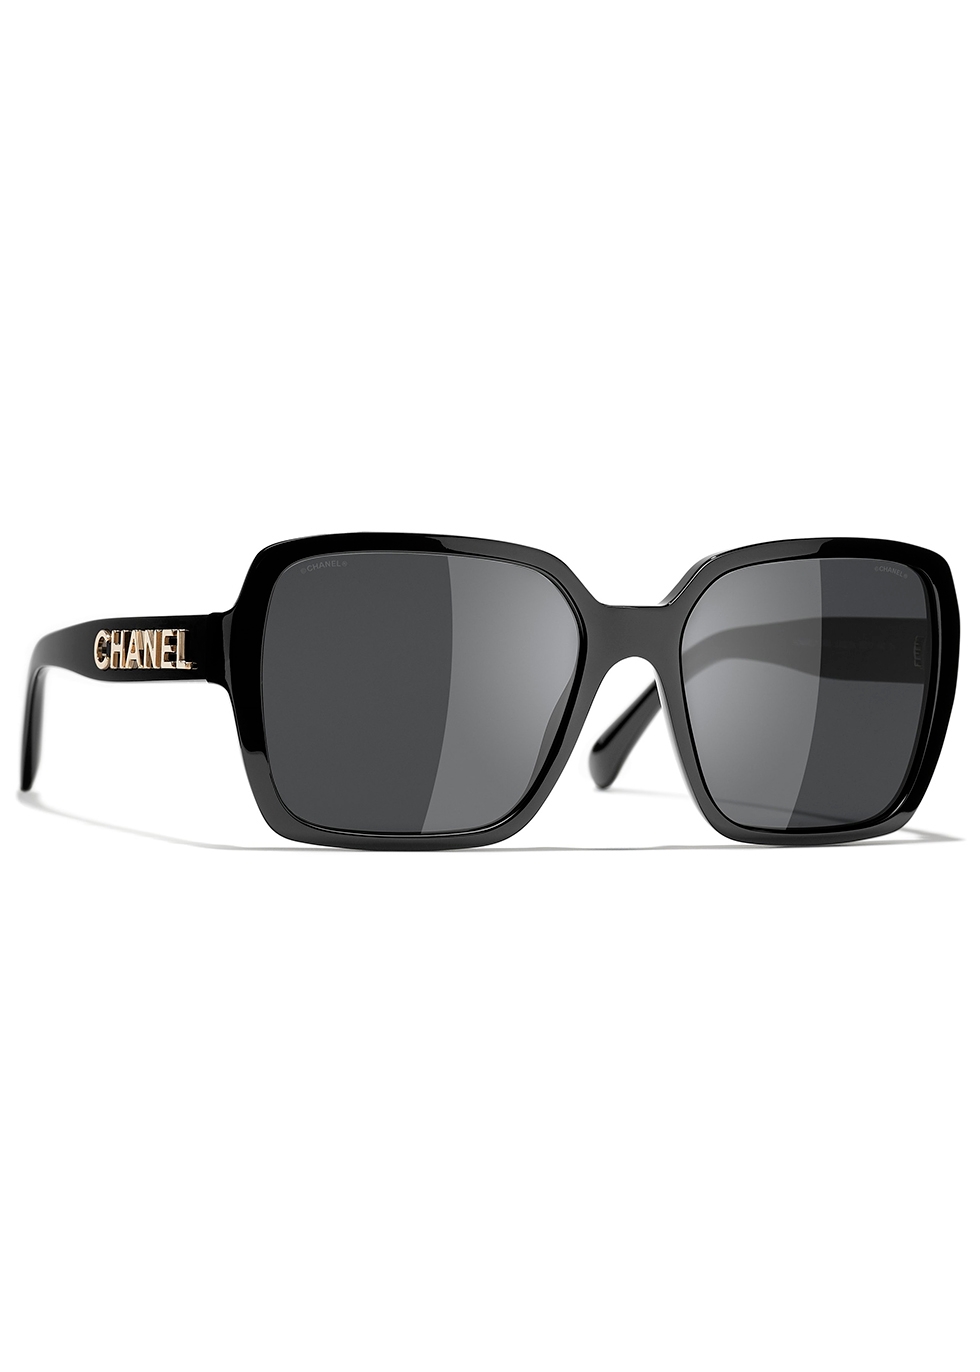 Chanel Launches Eyeglasses ECommerce in the United States  Teen Vogue